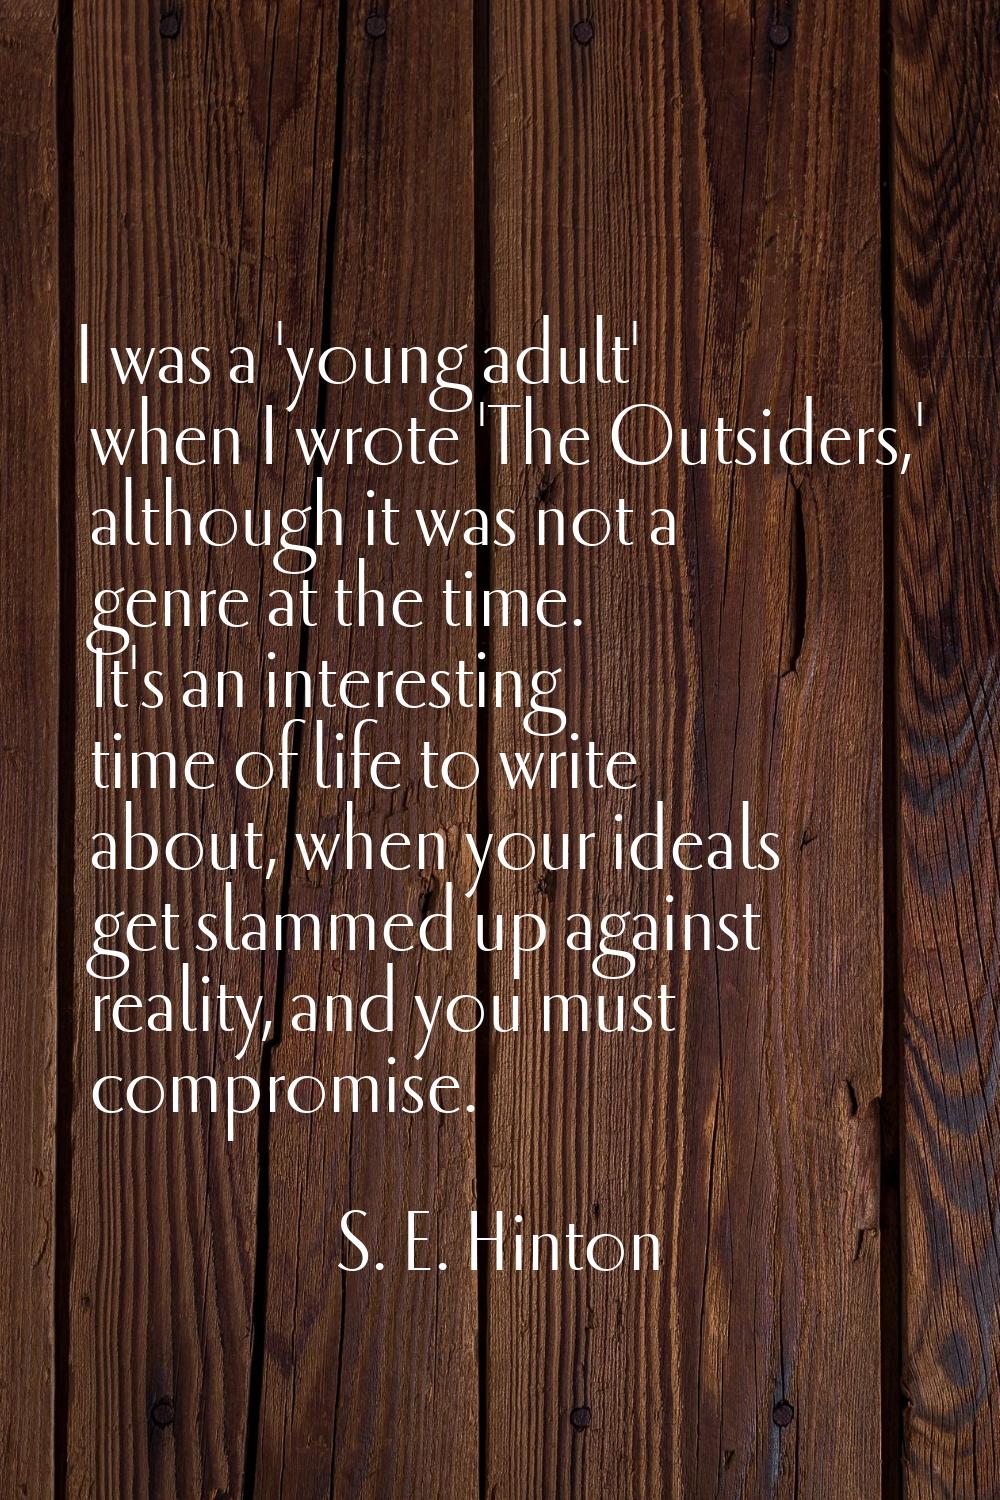 I was a 'young adult' when I wrote 'The Outsiders,' although it was not a genre at the time. It's a